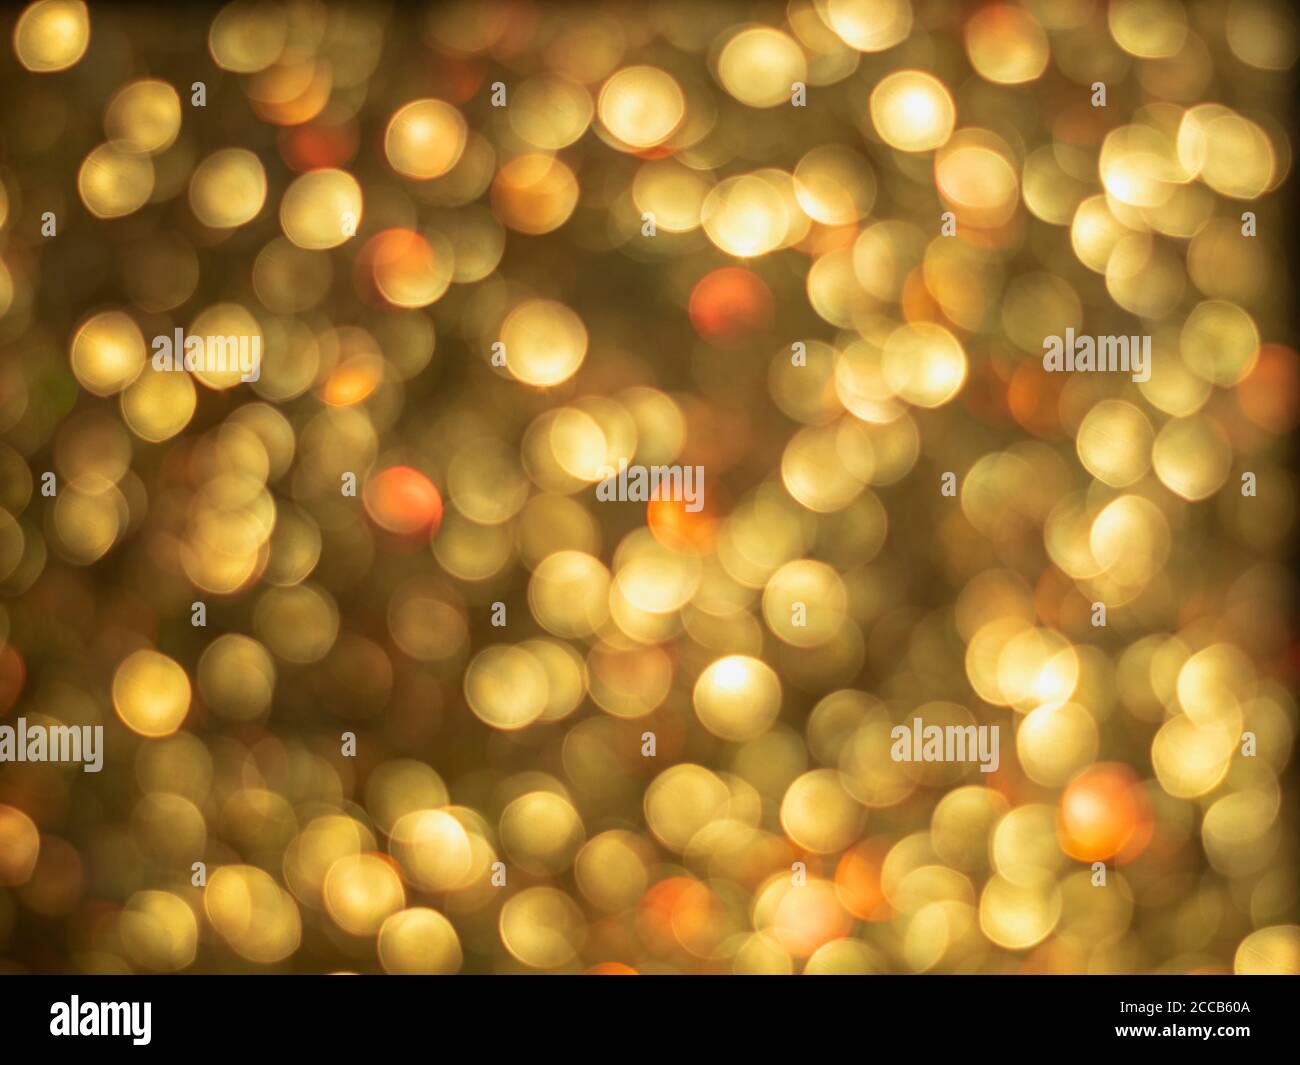 Gold bokeh holiday textured glitter background. Blurred abstract holiday background. Sparkling Glitter bokeh. Stock Photo